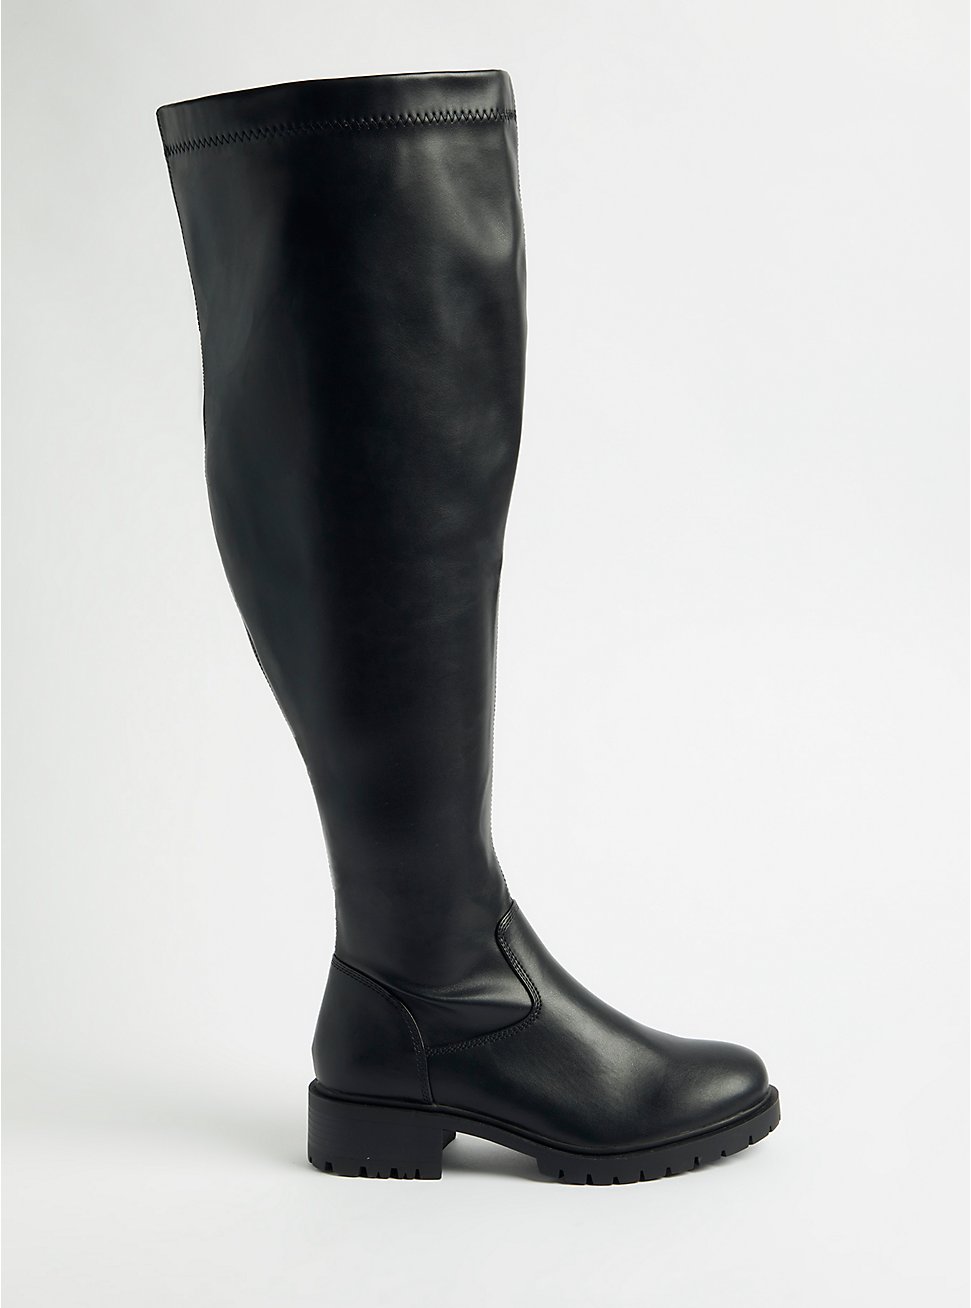 Plus Size Stretch Over The Knee Boot - Black (WW), BLACK, hi-res